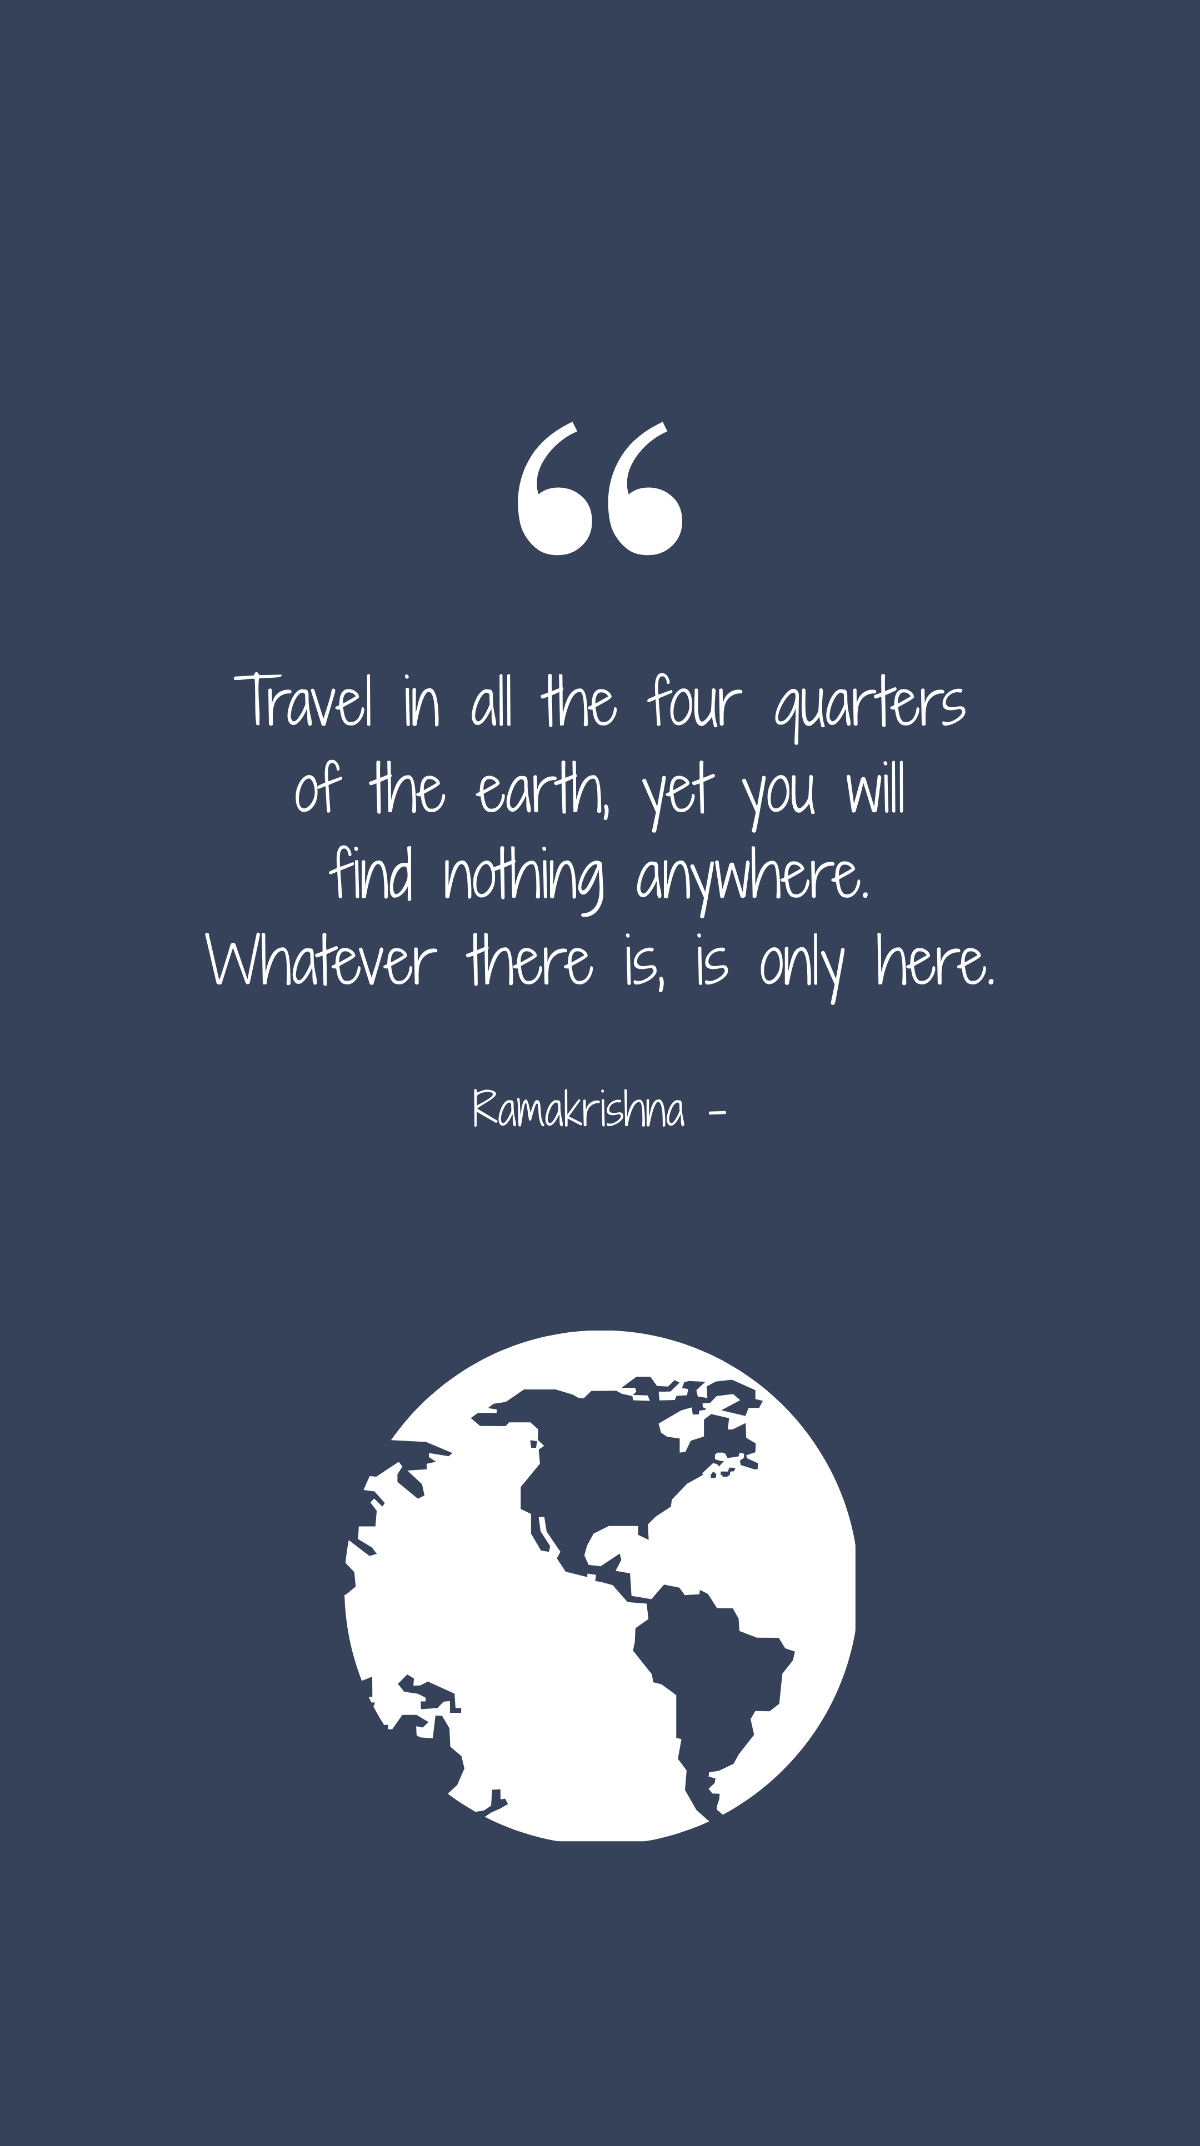 Ramakrishna - Travel in all the four quarters of the earth, yet you will find nothing anywhere. Whatever there is, is only here. Template